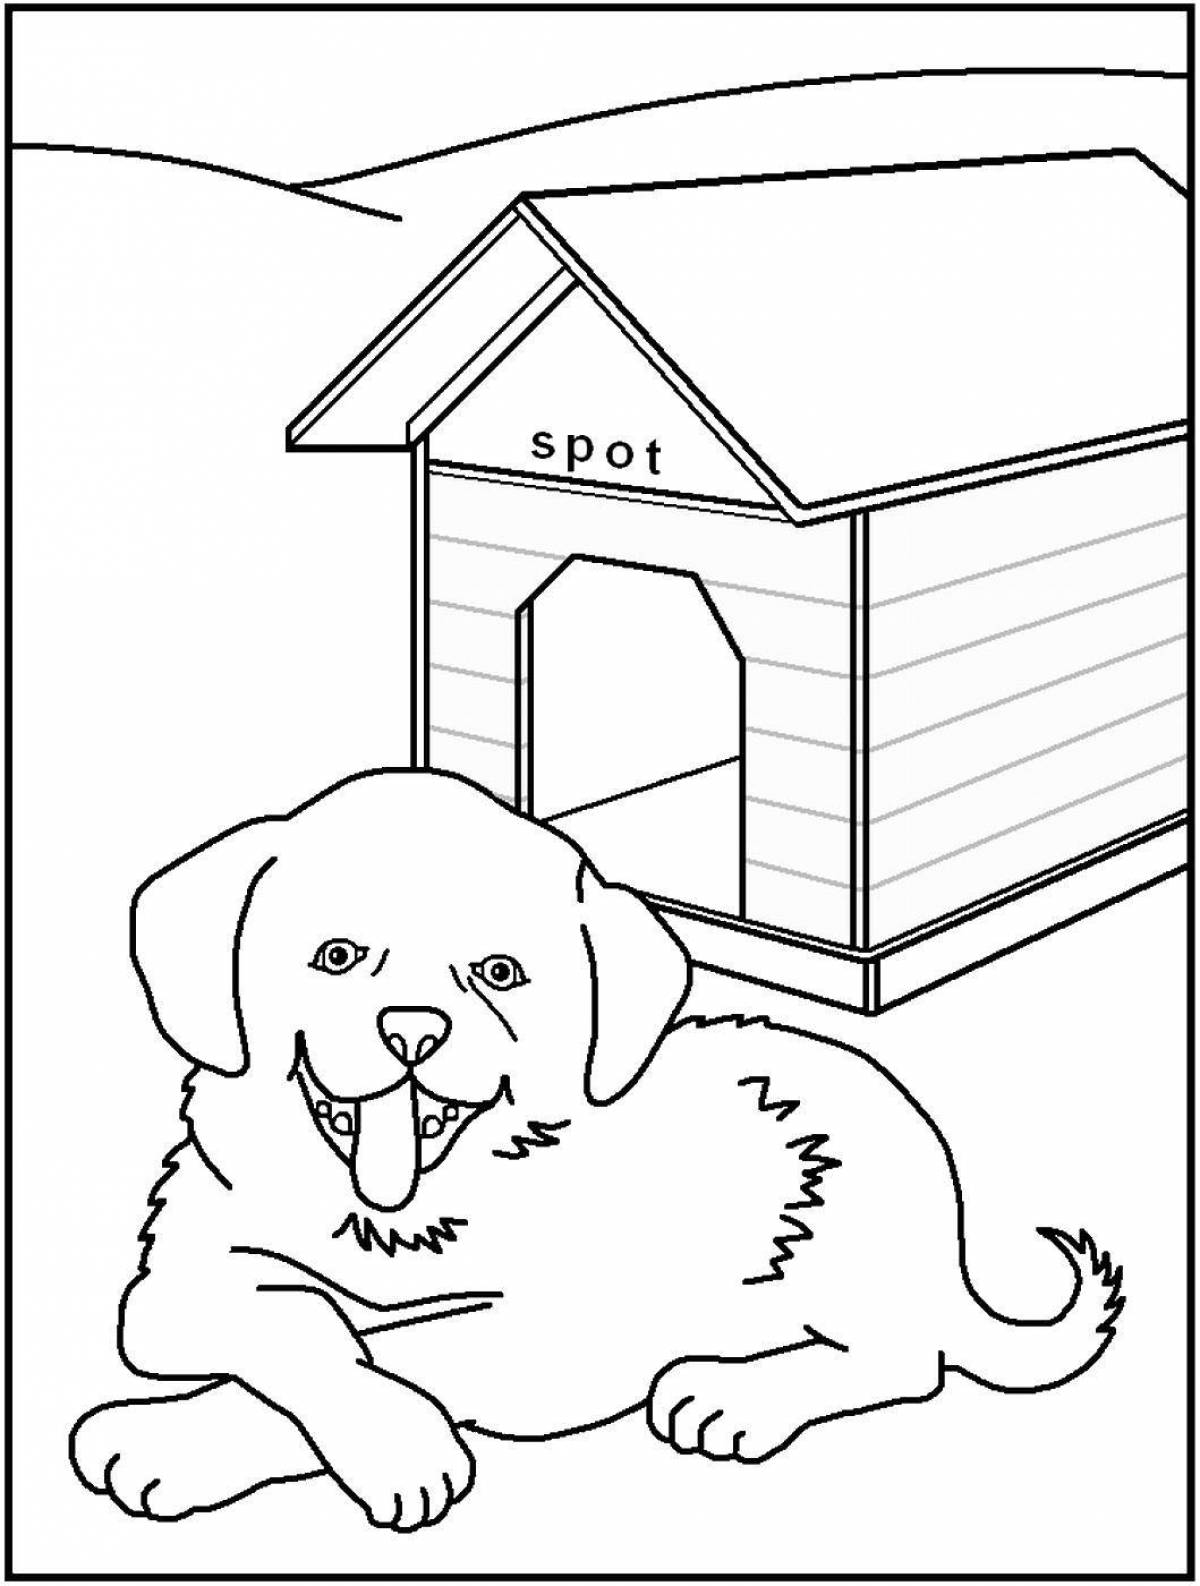 Coloring page serene animal house